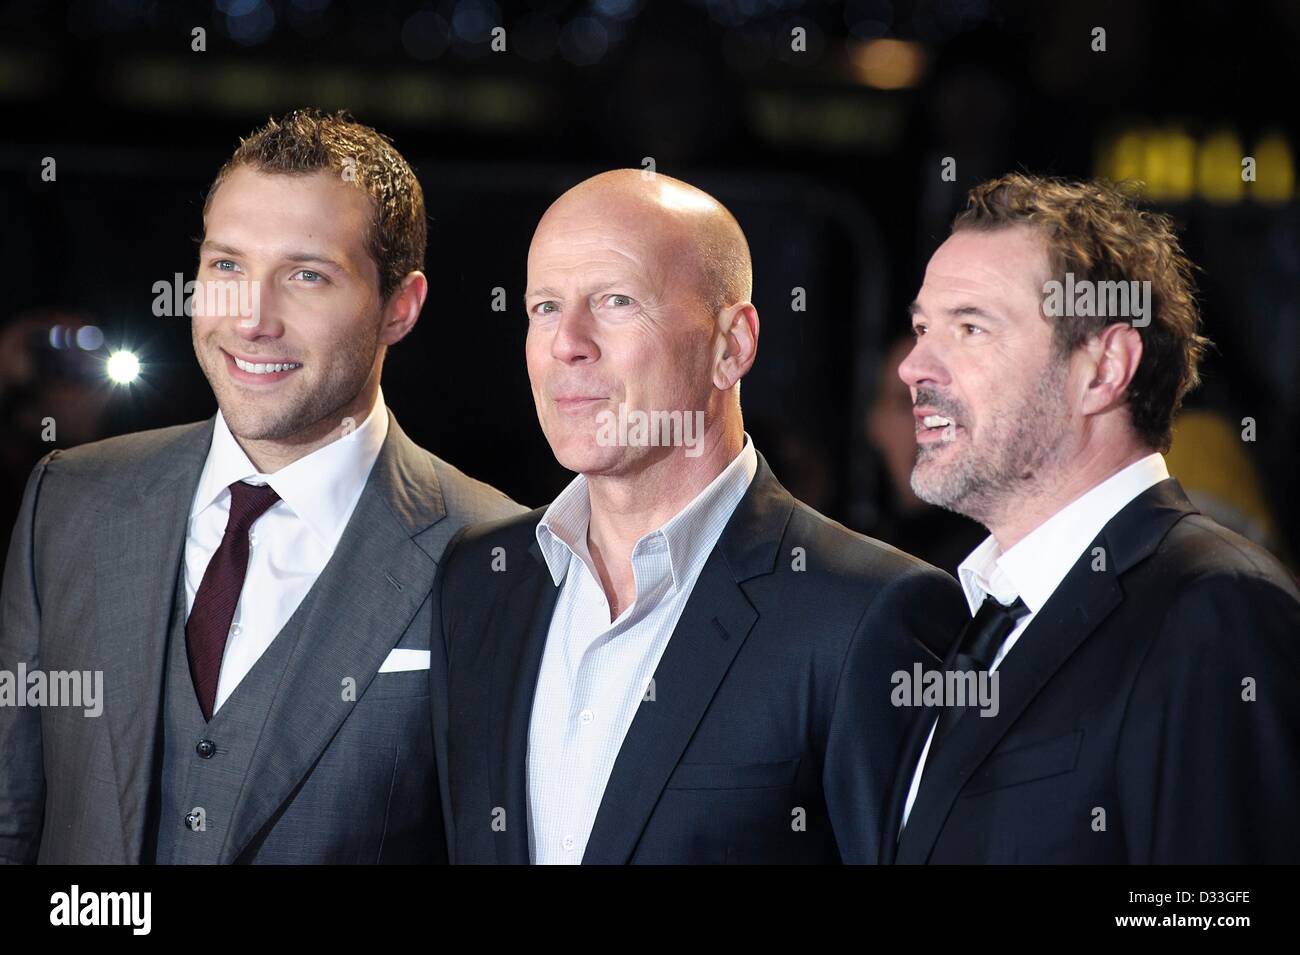 Cast attends the UK Premiere of A Good Day To Die Hard on 07/02/2013 at The Empire Leicester Square, London. Persons pictured: Jai Courtney, Bruce Willis, Sebastian Koch. Picture by Julie Edwards Stock Photo